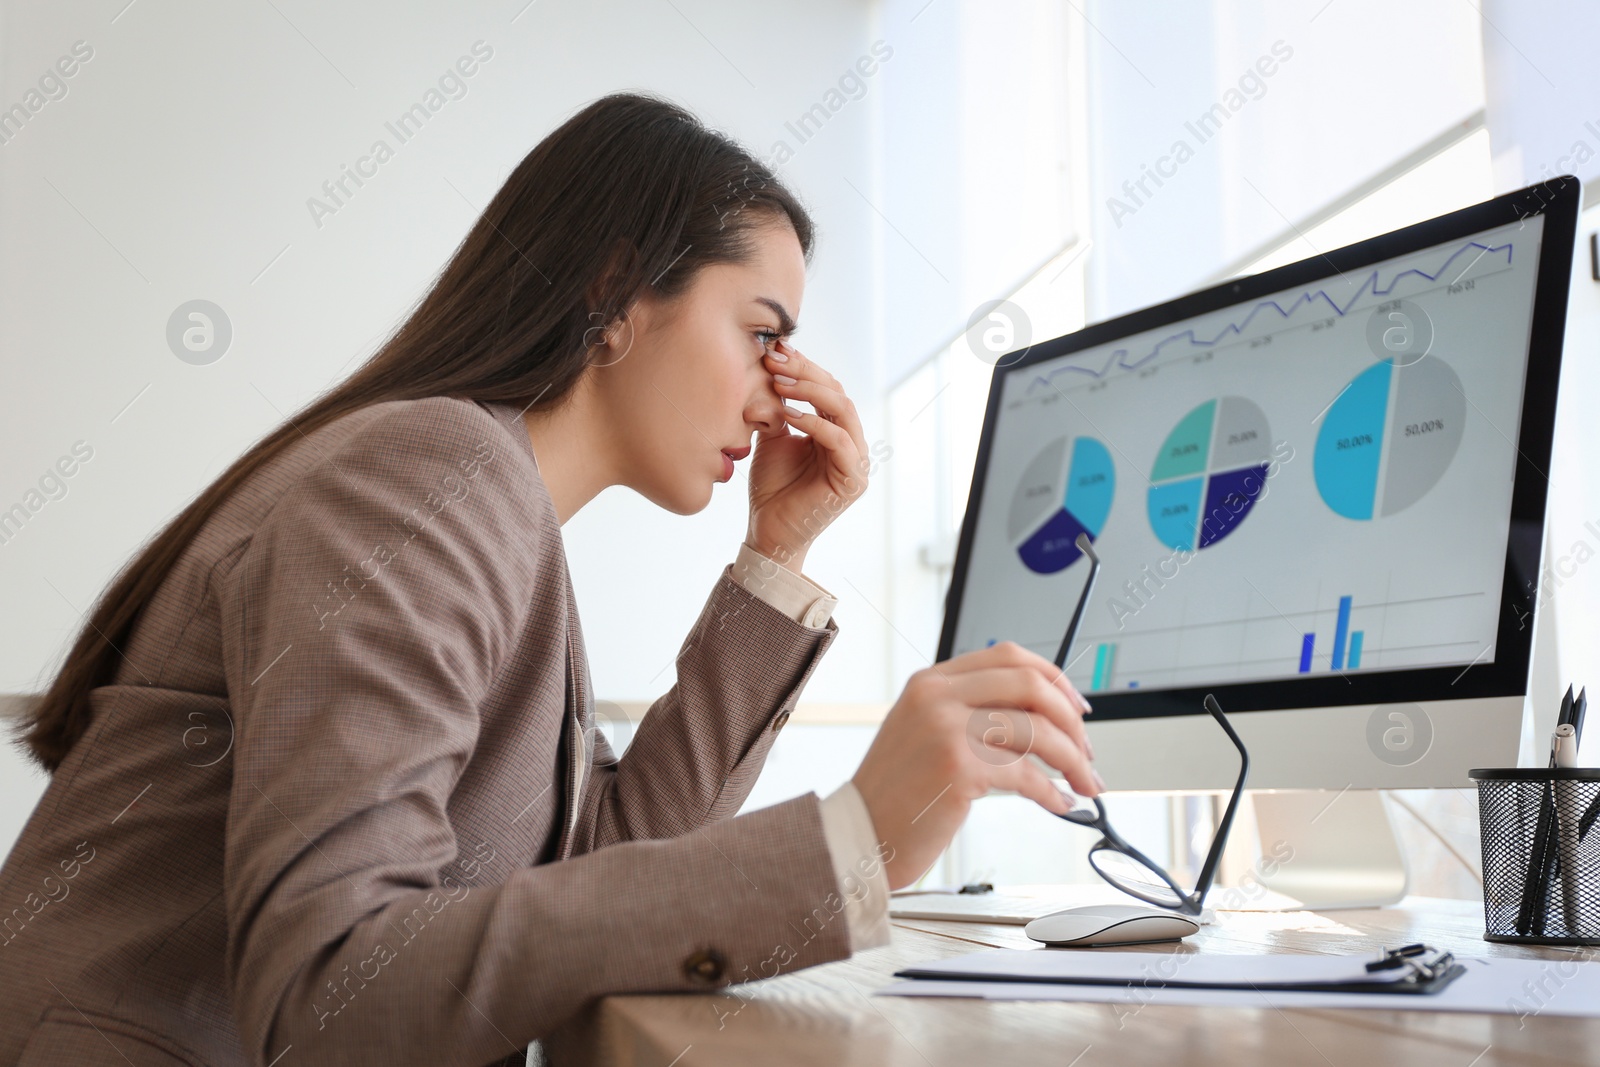 Photo of Businesswoman stressing out at workplace in office